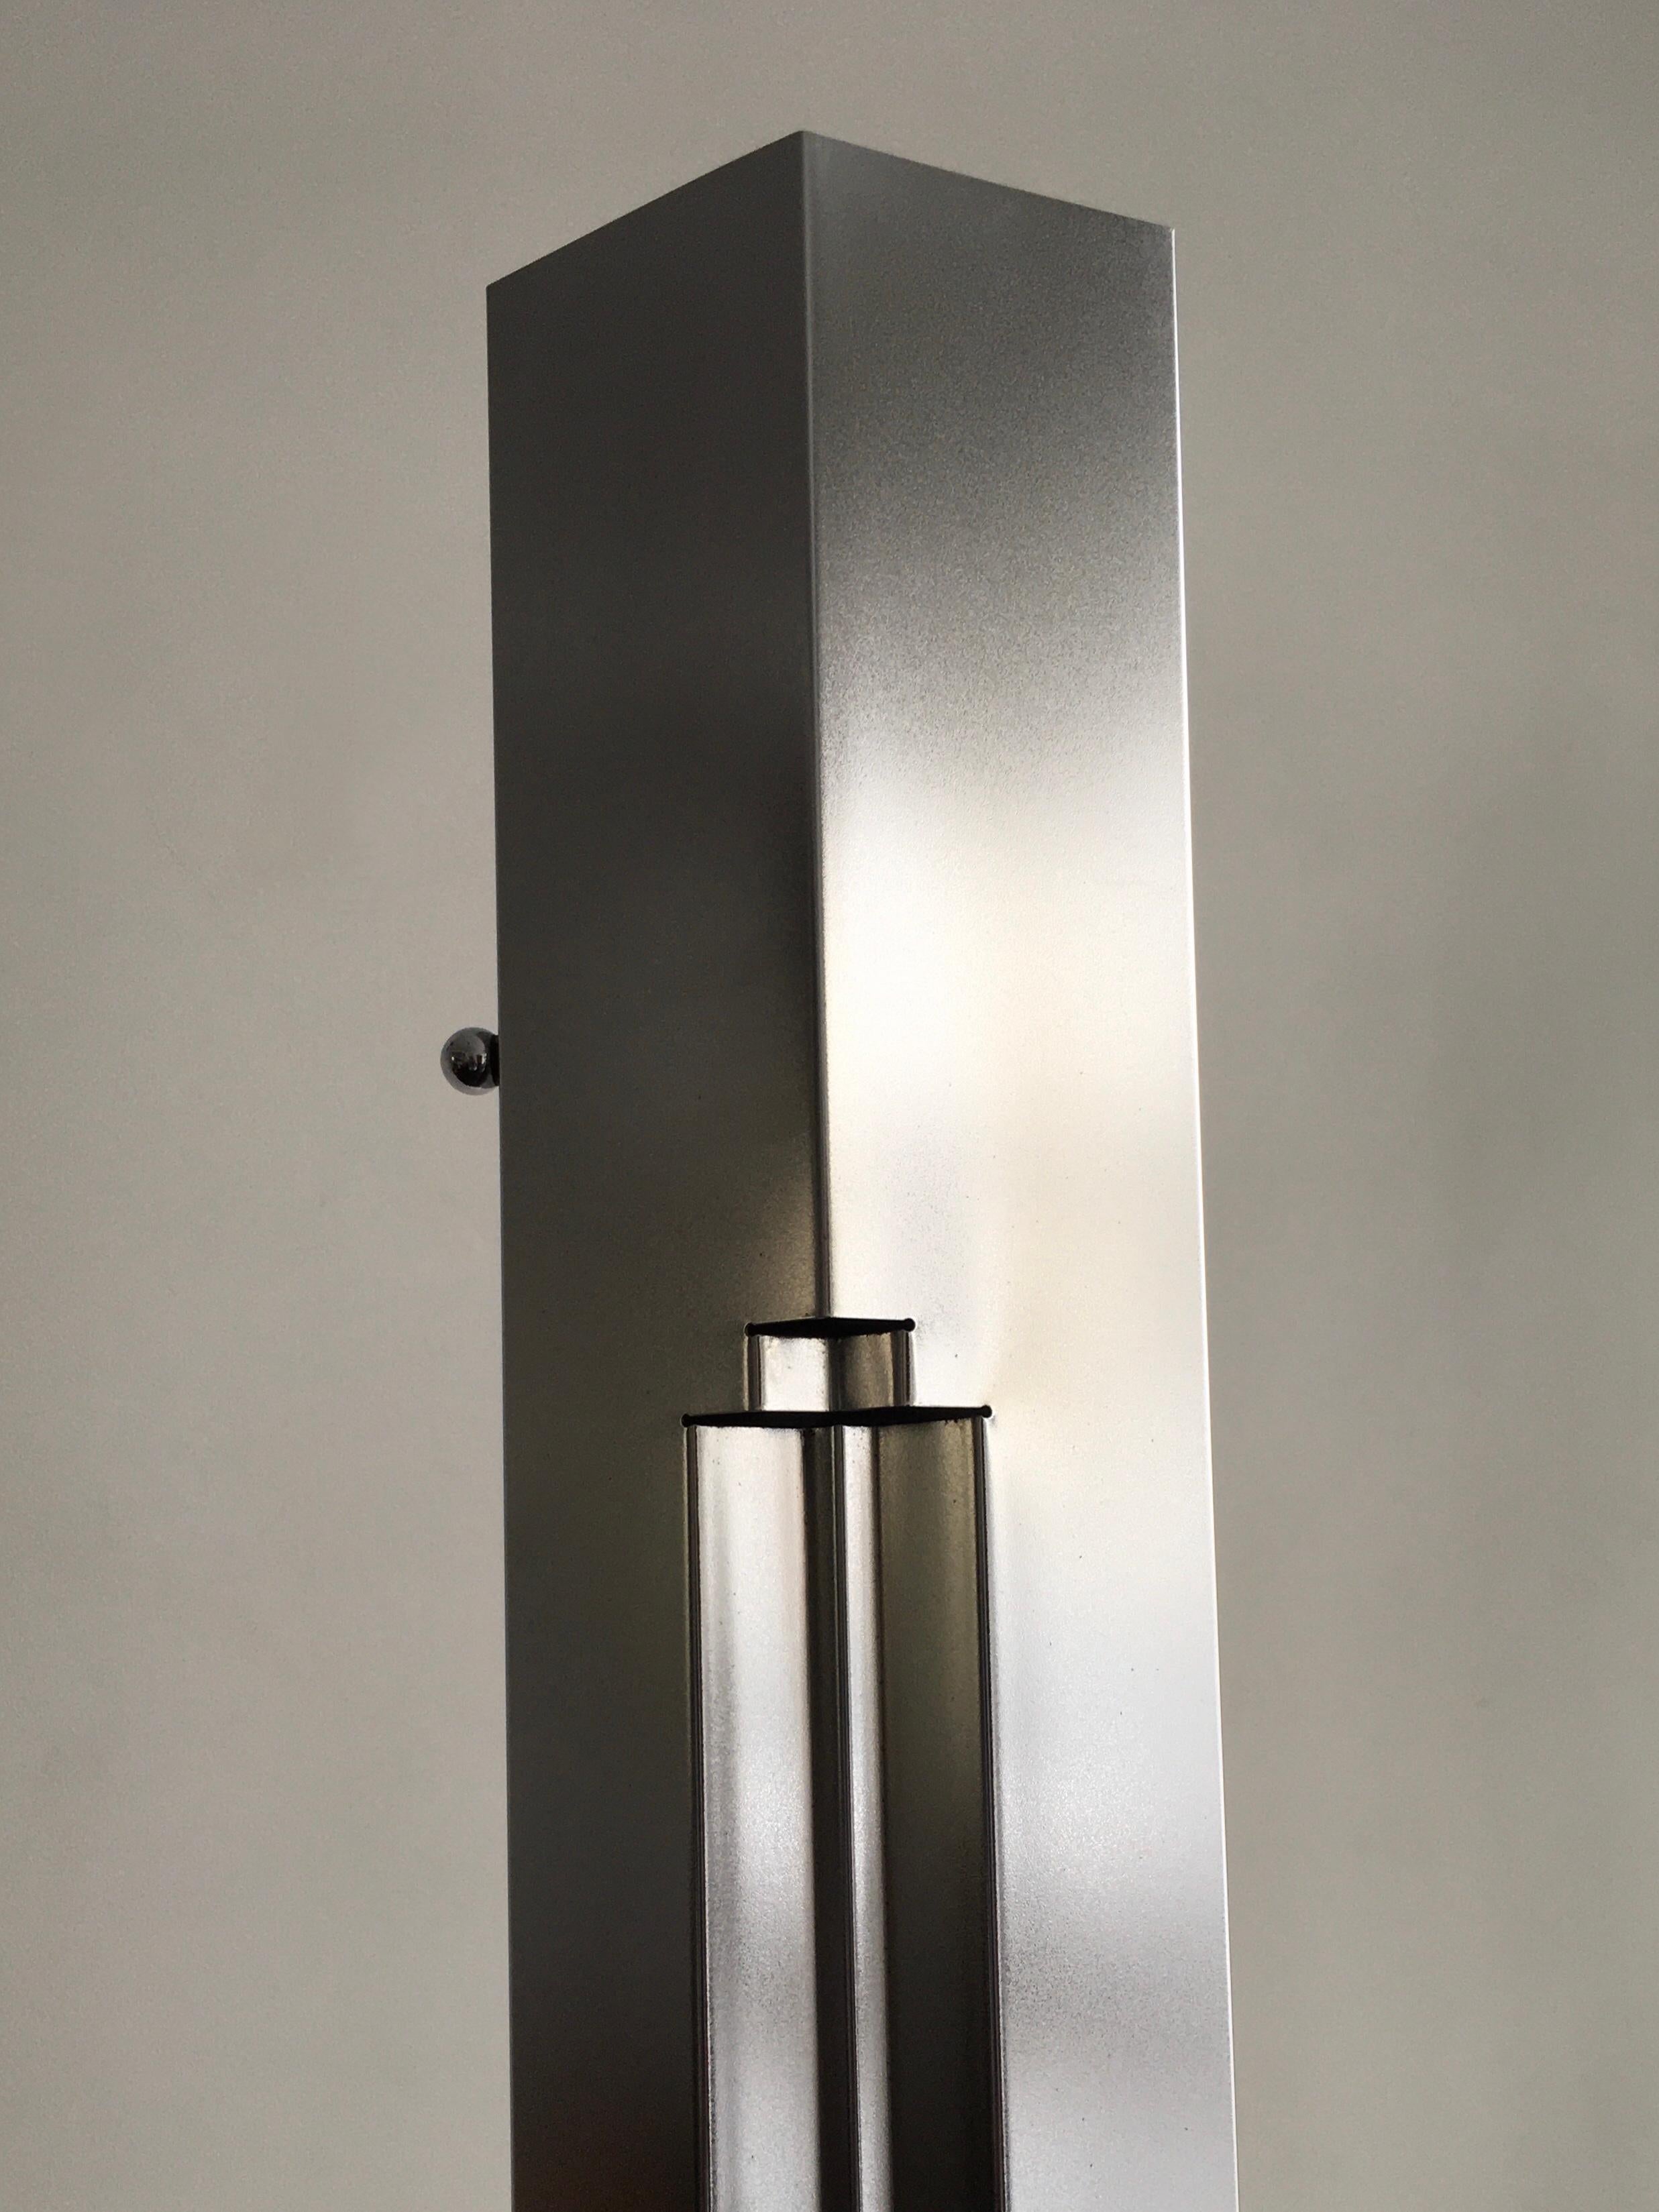 Iconic light from the great designer Kazuide Takahama in a rare galvanized steel finish.